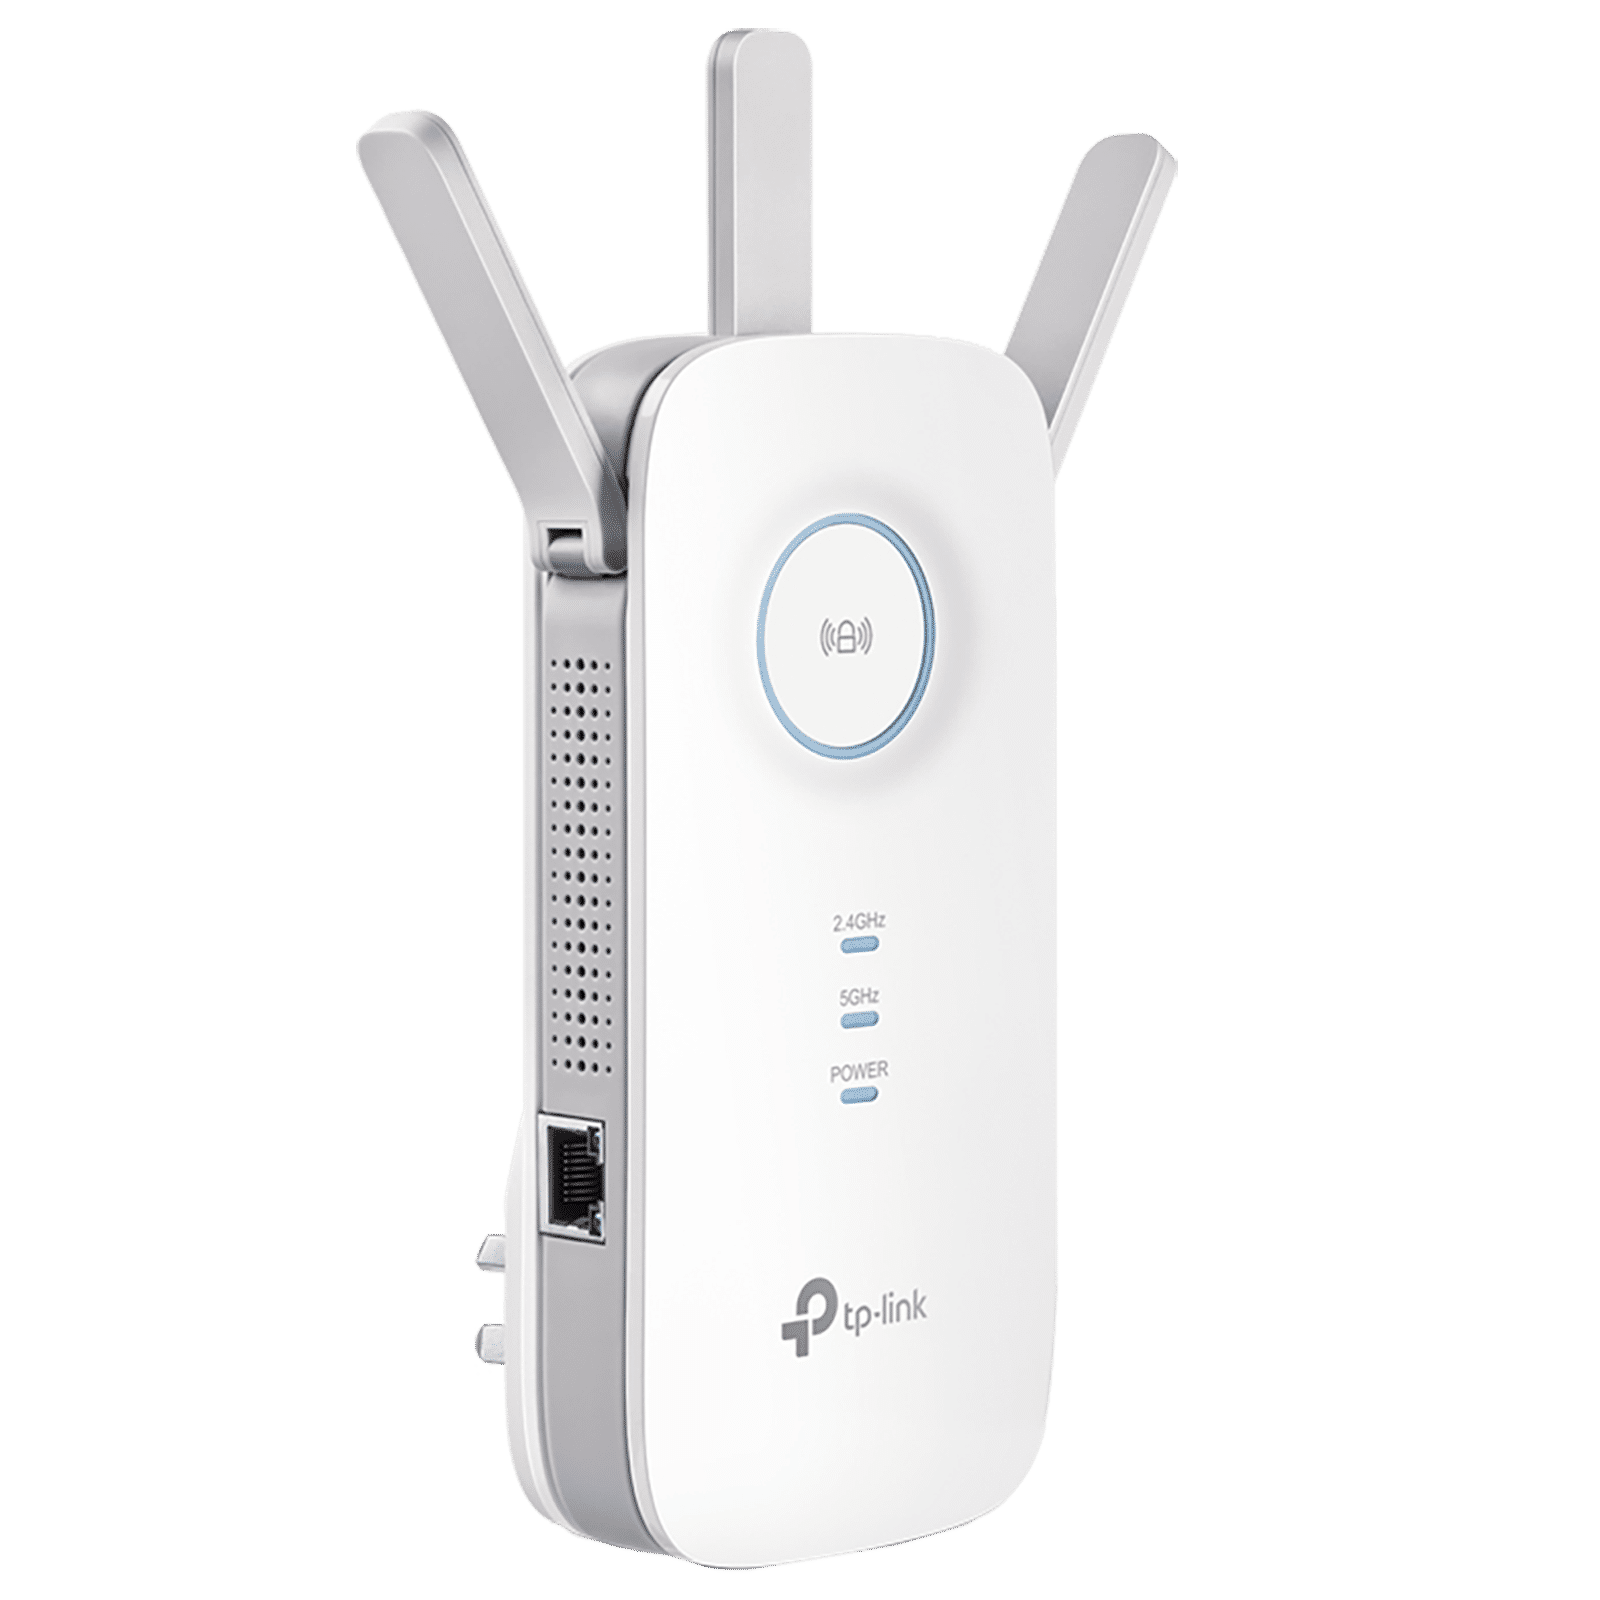 2.4ghz & 5ghz(11ac) TP LINK RE305 Wi-Fi Range Extender at best price in  Mumbai